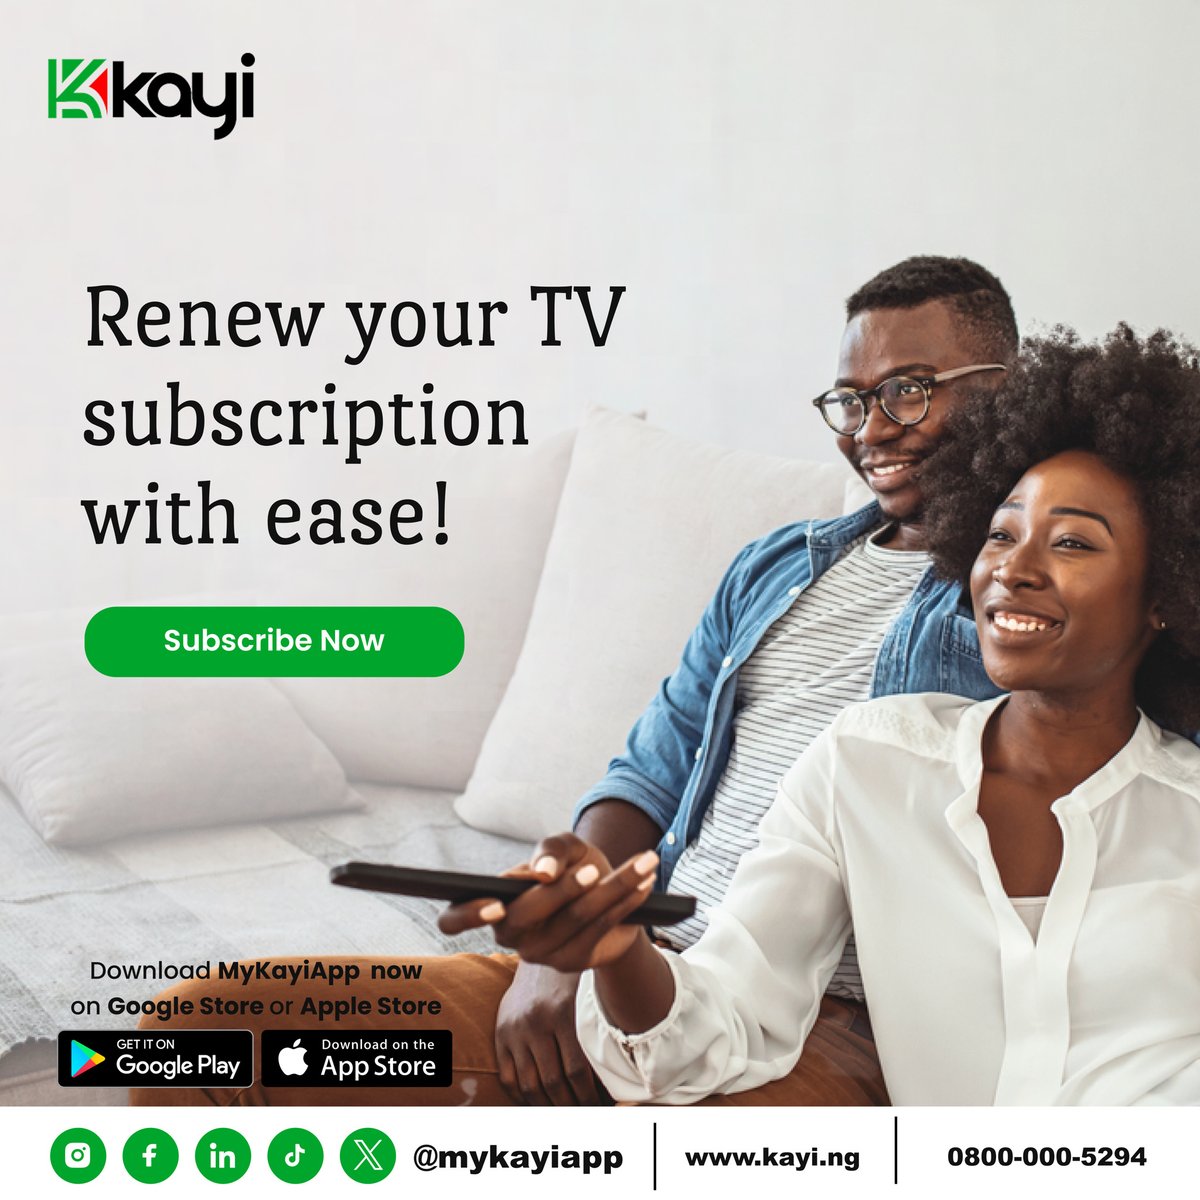 Renew your cable TV subscription hassle-free with Kayiapp! Follow these simple steps to ensure uninterrupted access to your favorite shows and channels.

#RequestPaymentMadeEasy #ModernConvenience #TraditionalValues #MyKayiappEase
#Kayiway
#DigitalBanking